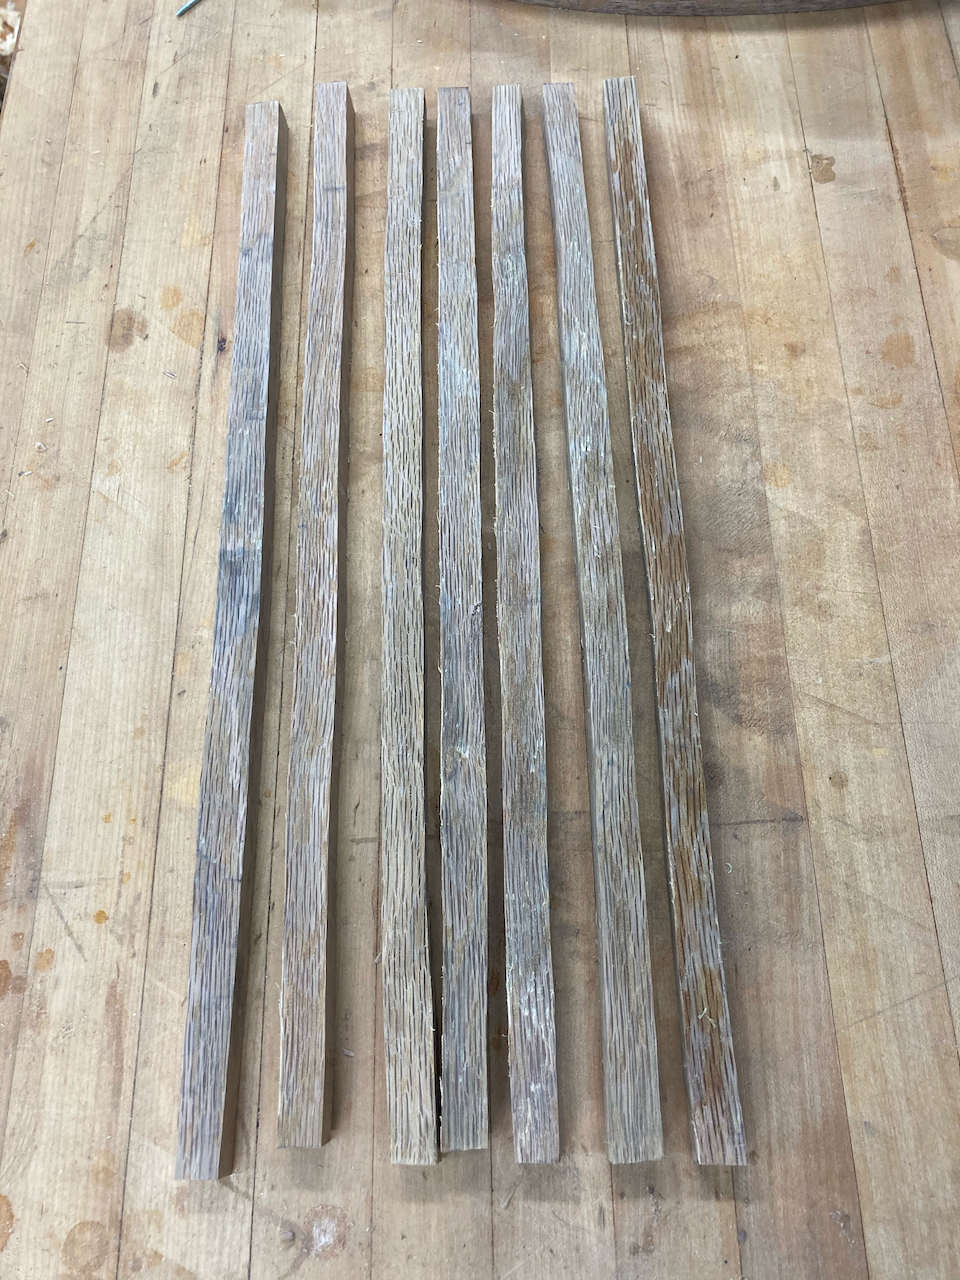 Another set of rough spindle blanks